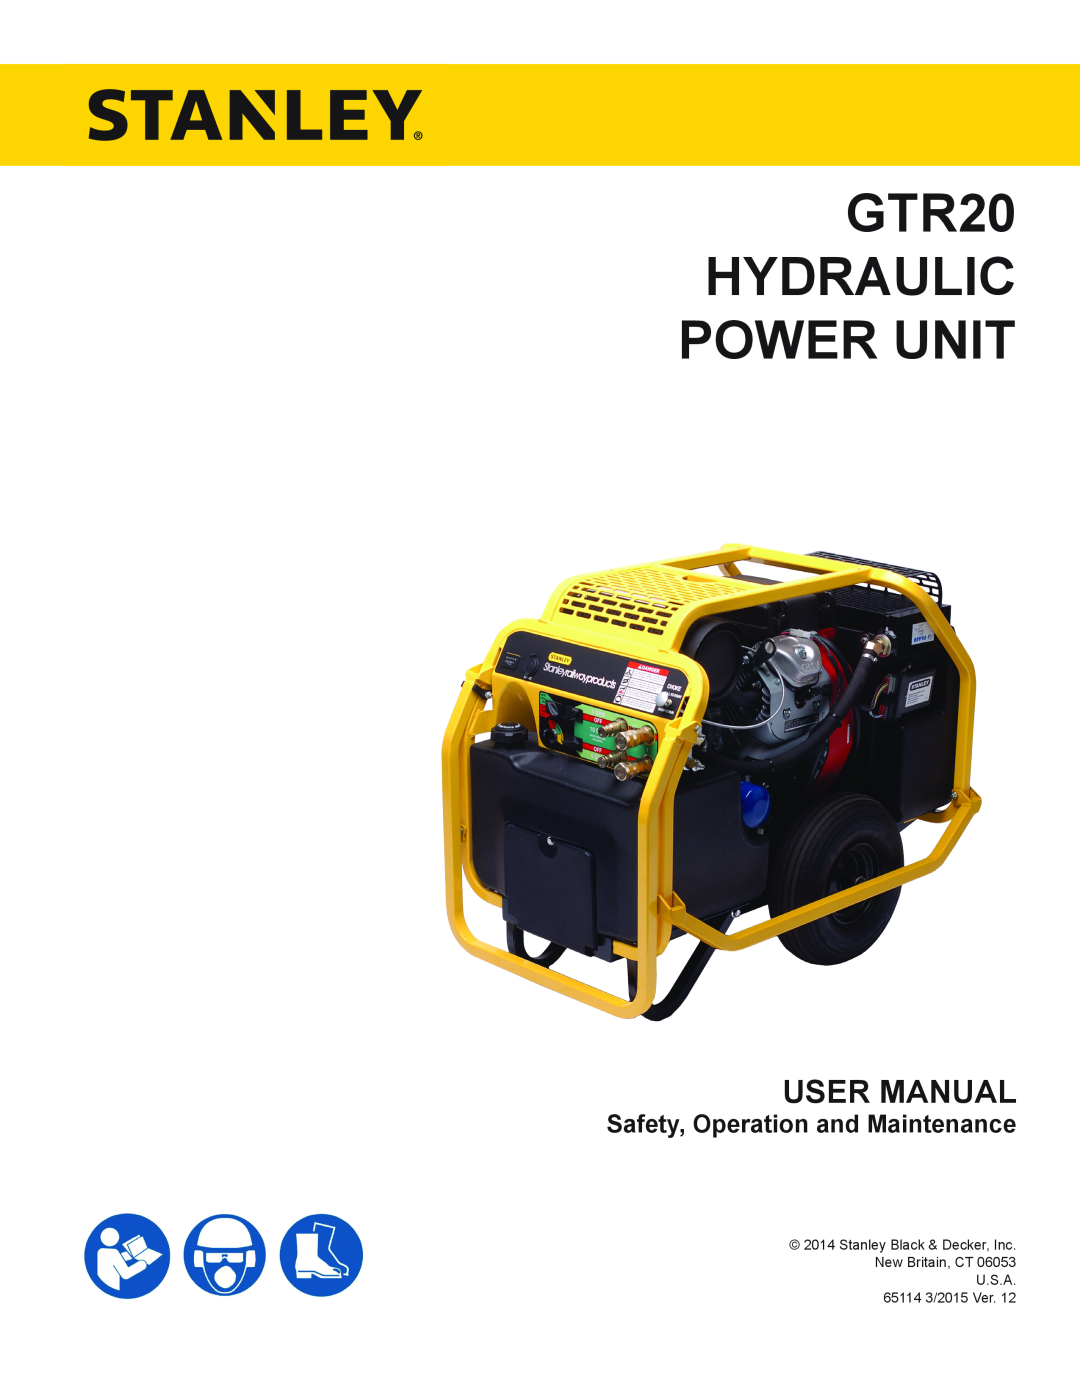 Stanley Black & Decker user manual Safety, Operation and Maintenance, GTR20 HYDRAULIC POWER UNIT 